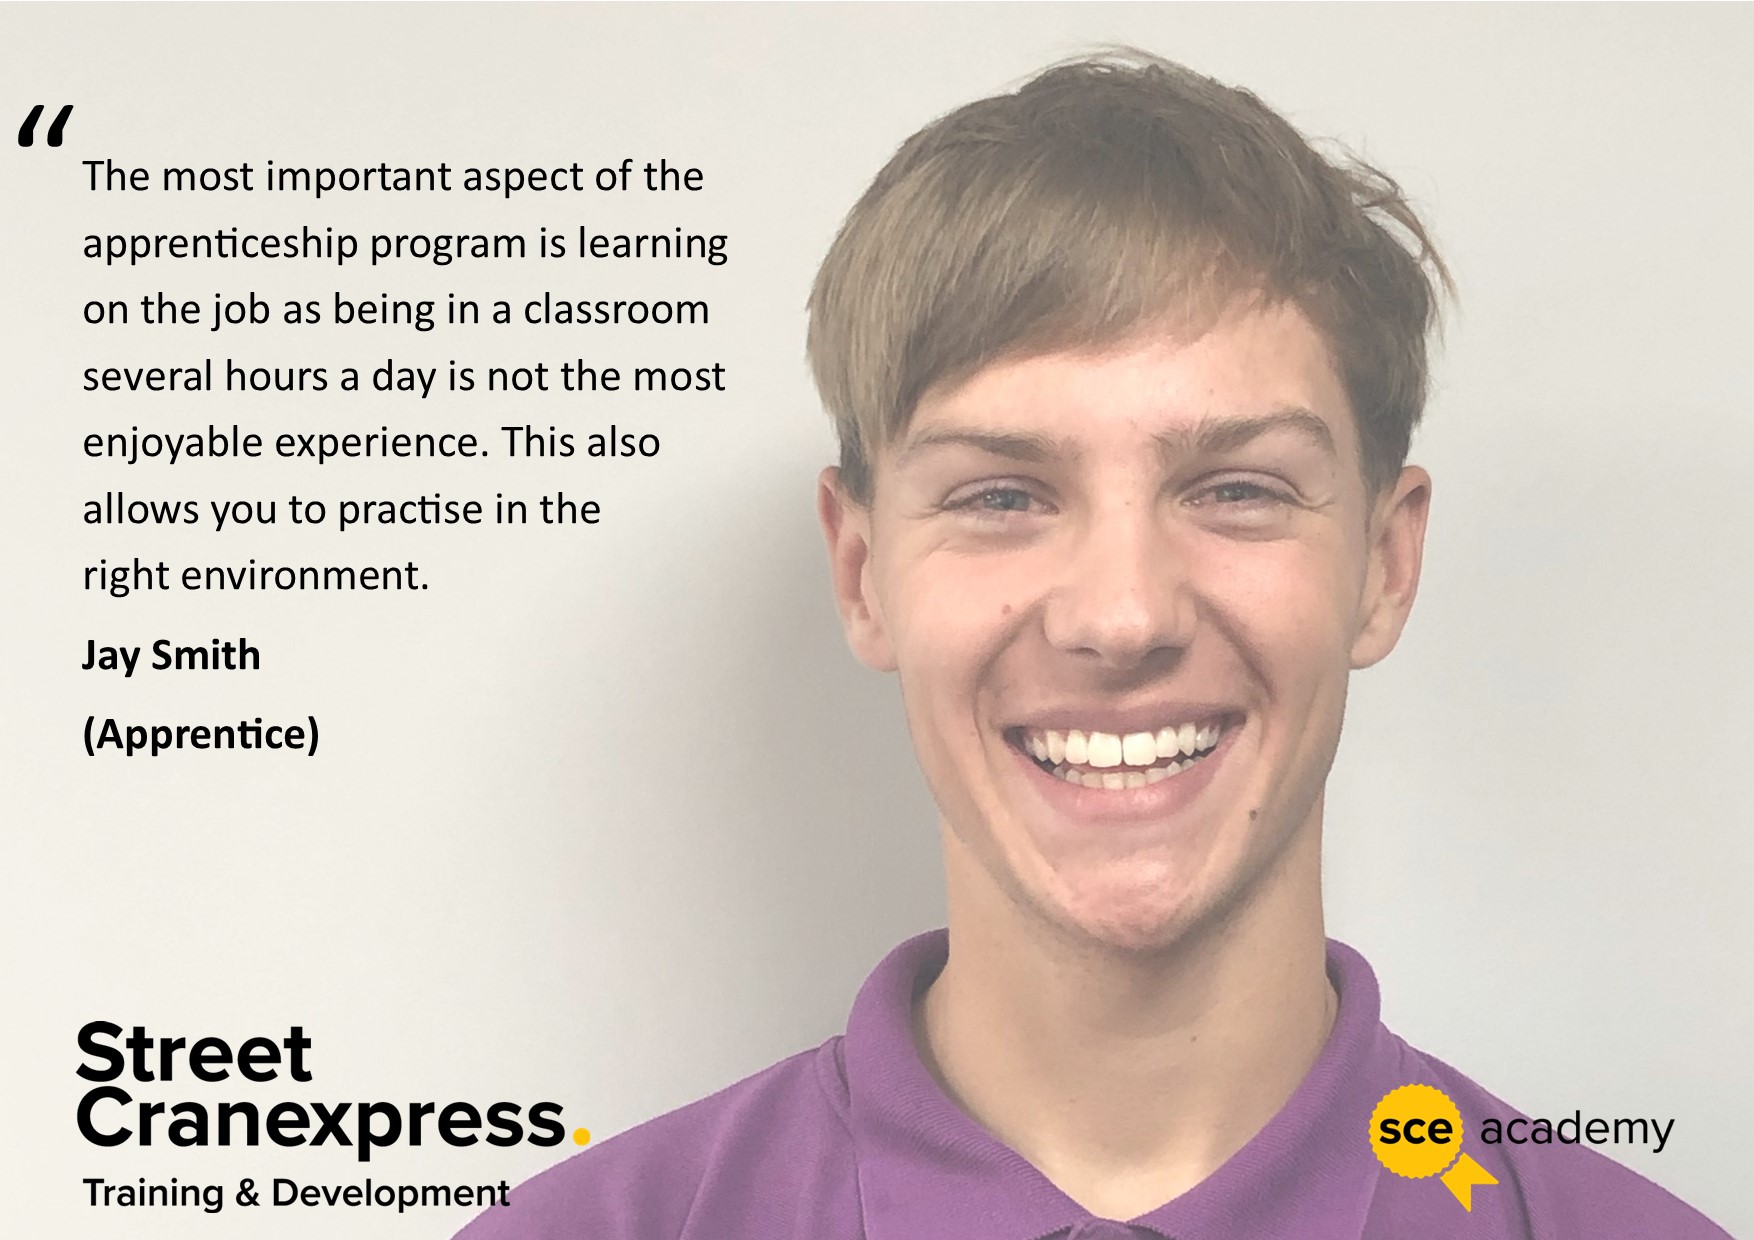 A picture of Jay Smith, a Street Cranexpress apprentice, with a quote talking about his training says, "The most important aspect of the apprenticeship programme is learning on the job, as being in a classroom several hours a day is not the most enjoyable experience. This also allows you to practice in the right environment." 